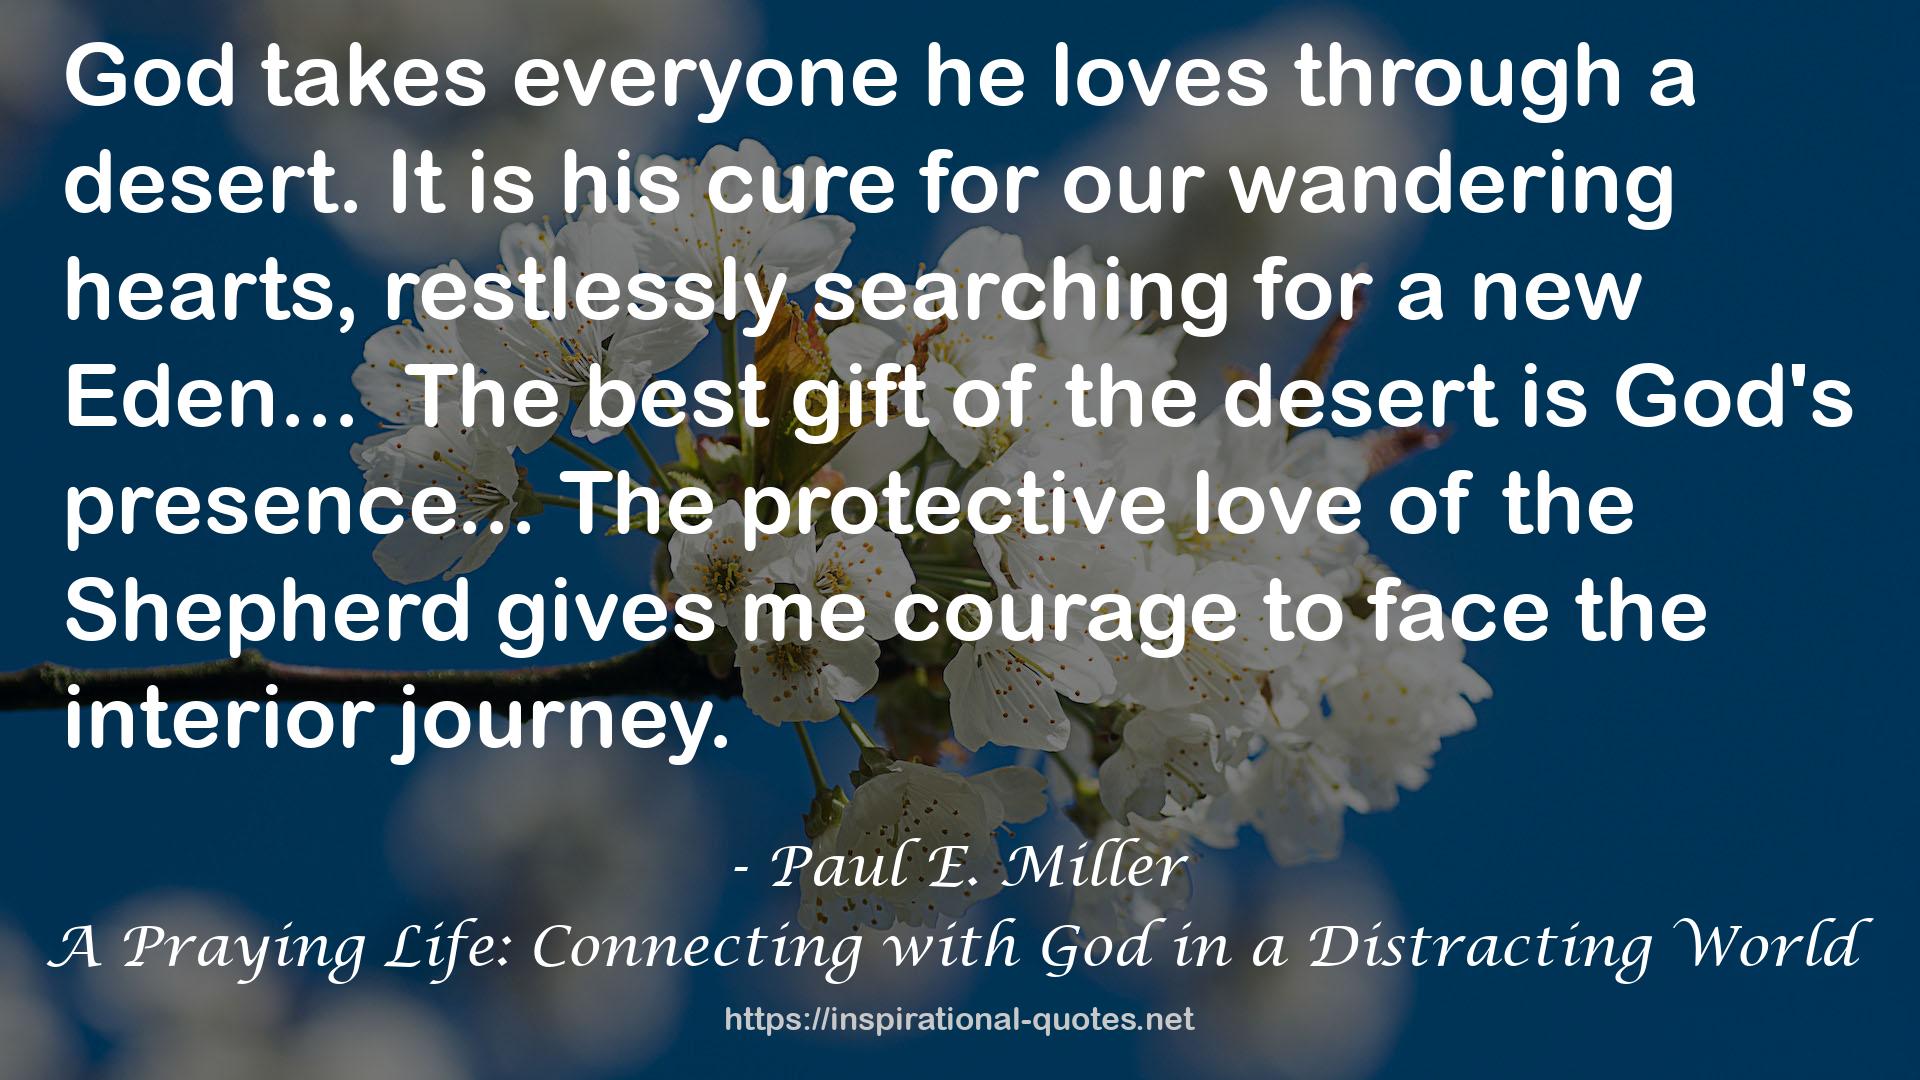 A Praying Life: Connecting with God in a Distracting World QUOTES